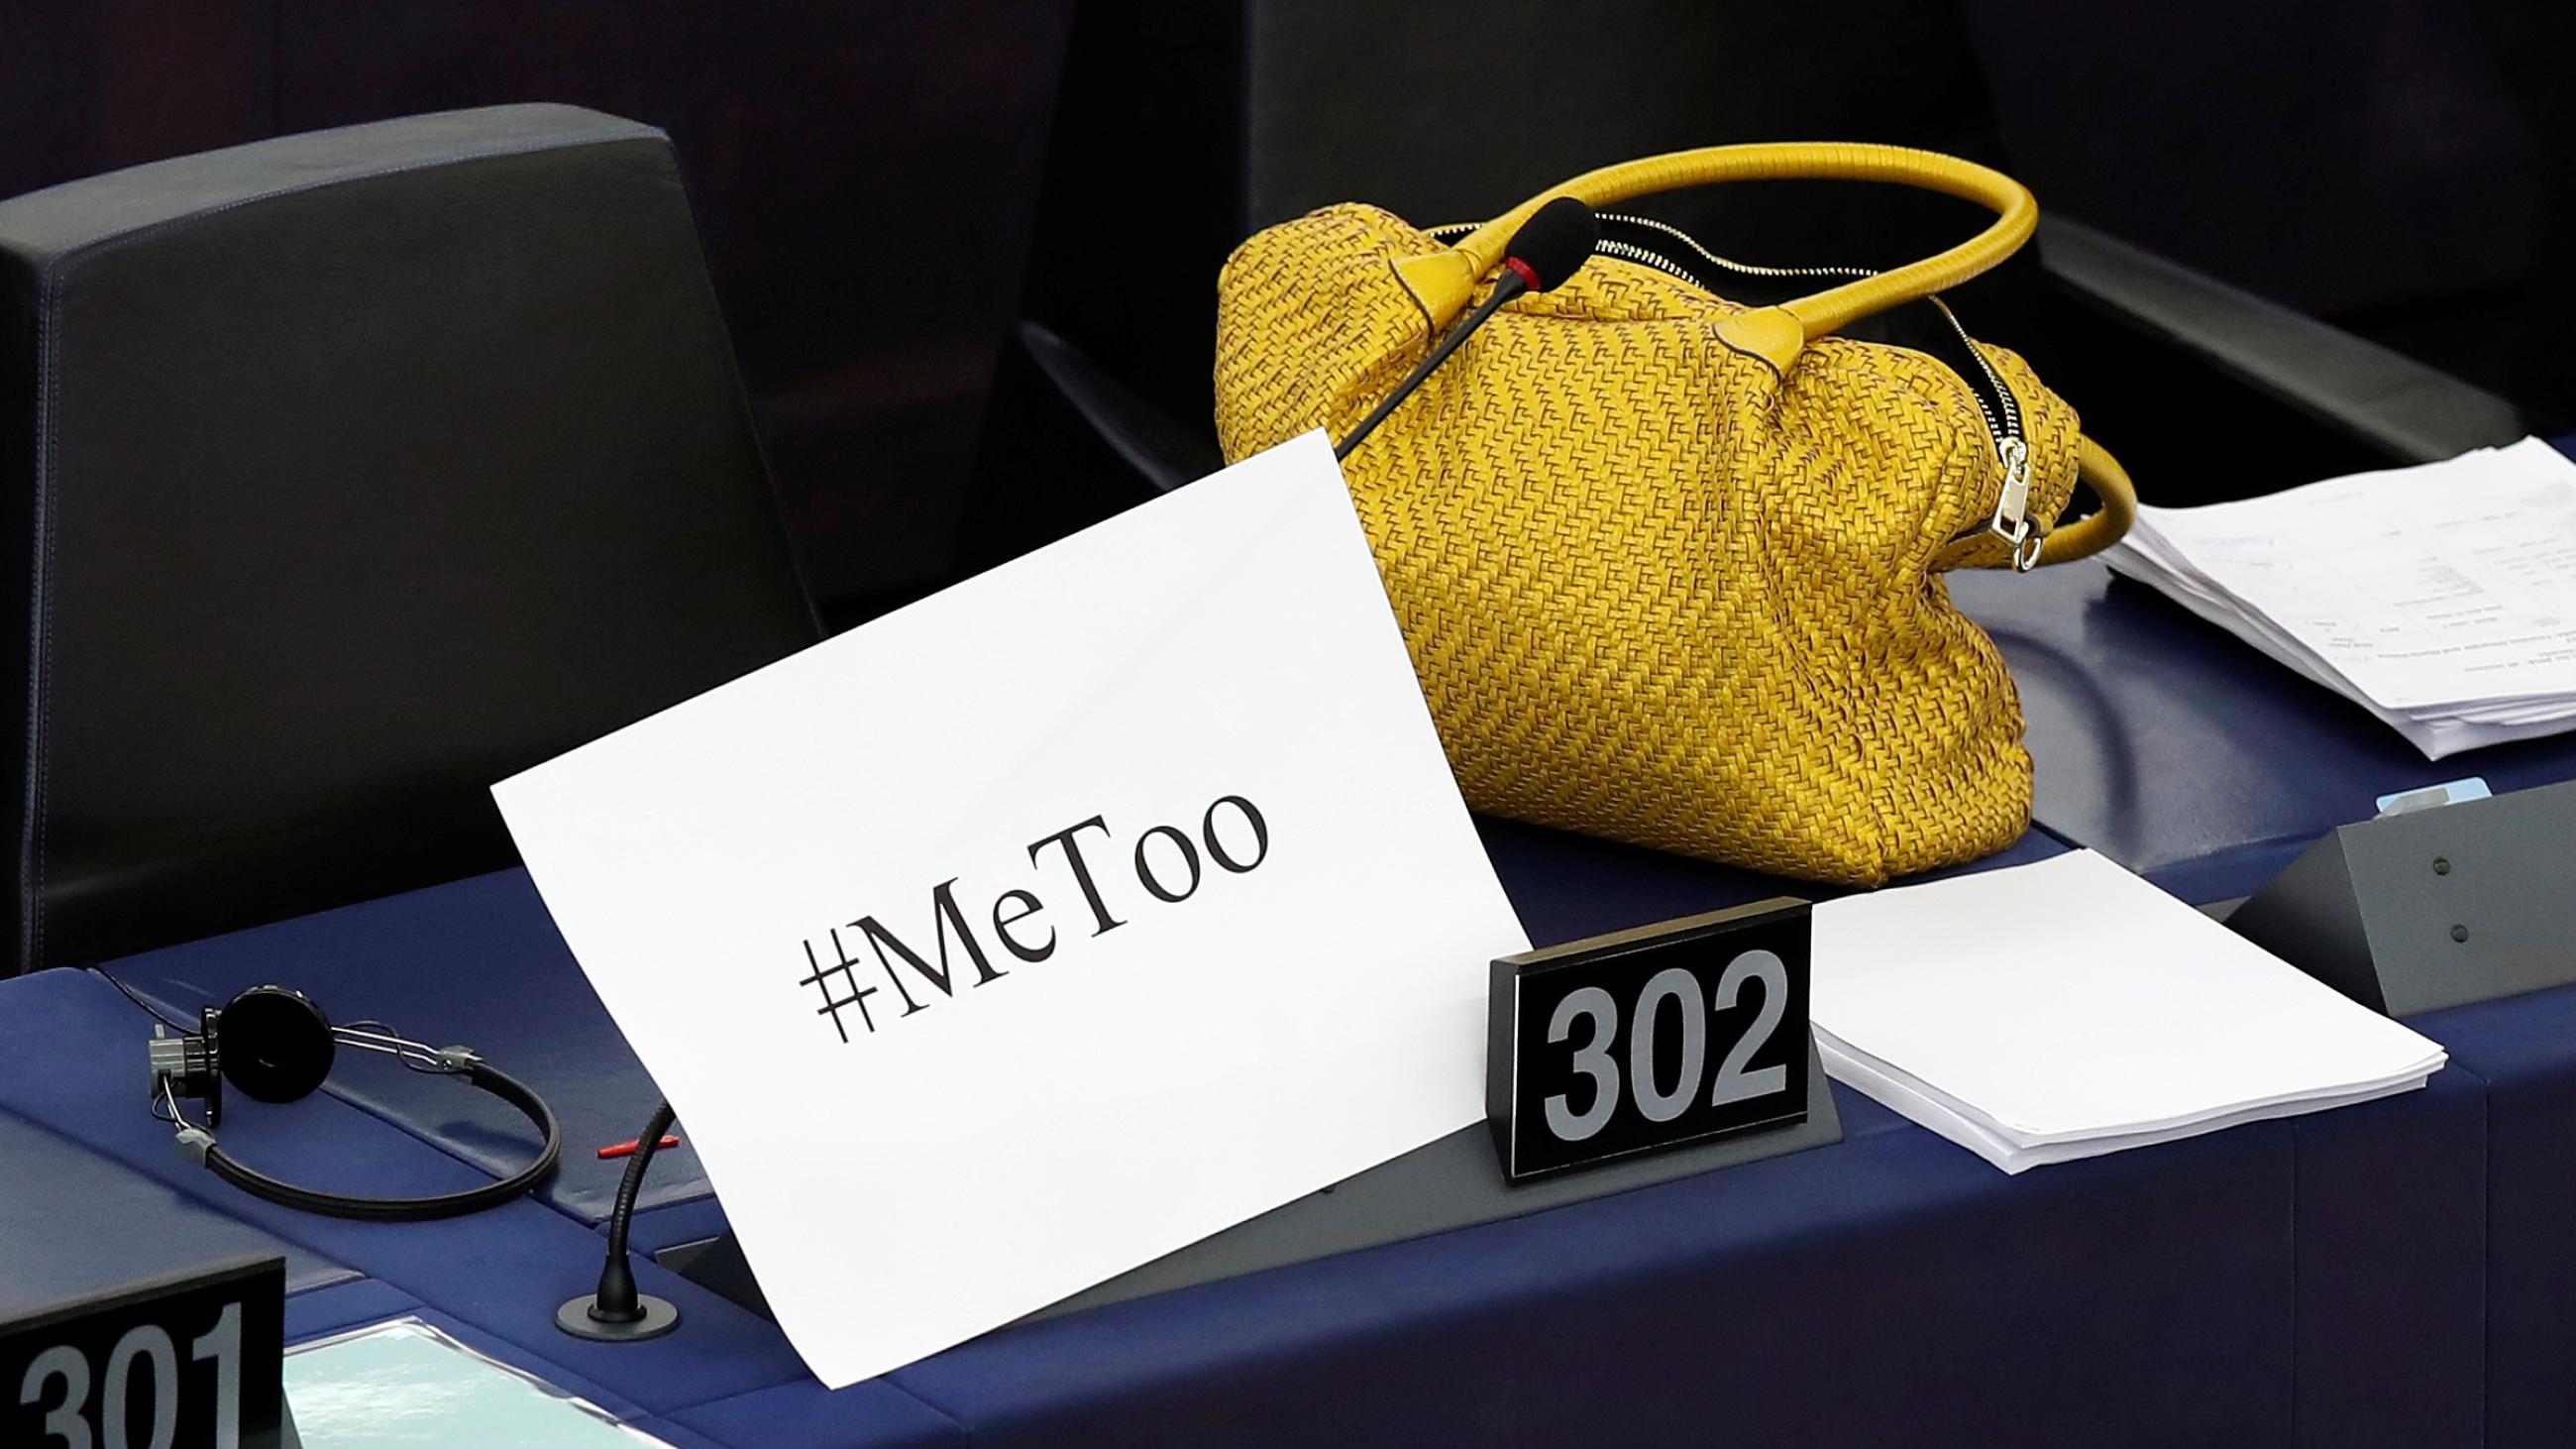 A "MeToo" placard is seen on a European Parliament member's desk during a debate to discuss preventive measures against sexual harassment and abuse at the European Parliament in Strasbourg, France.